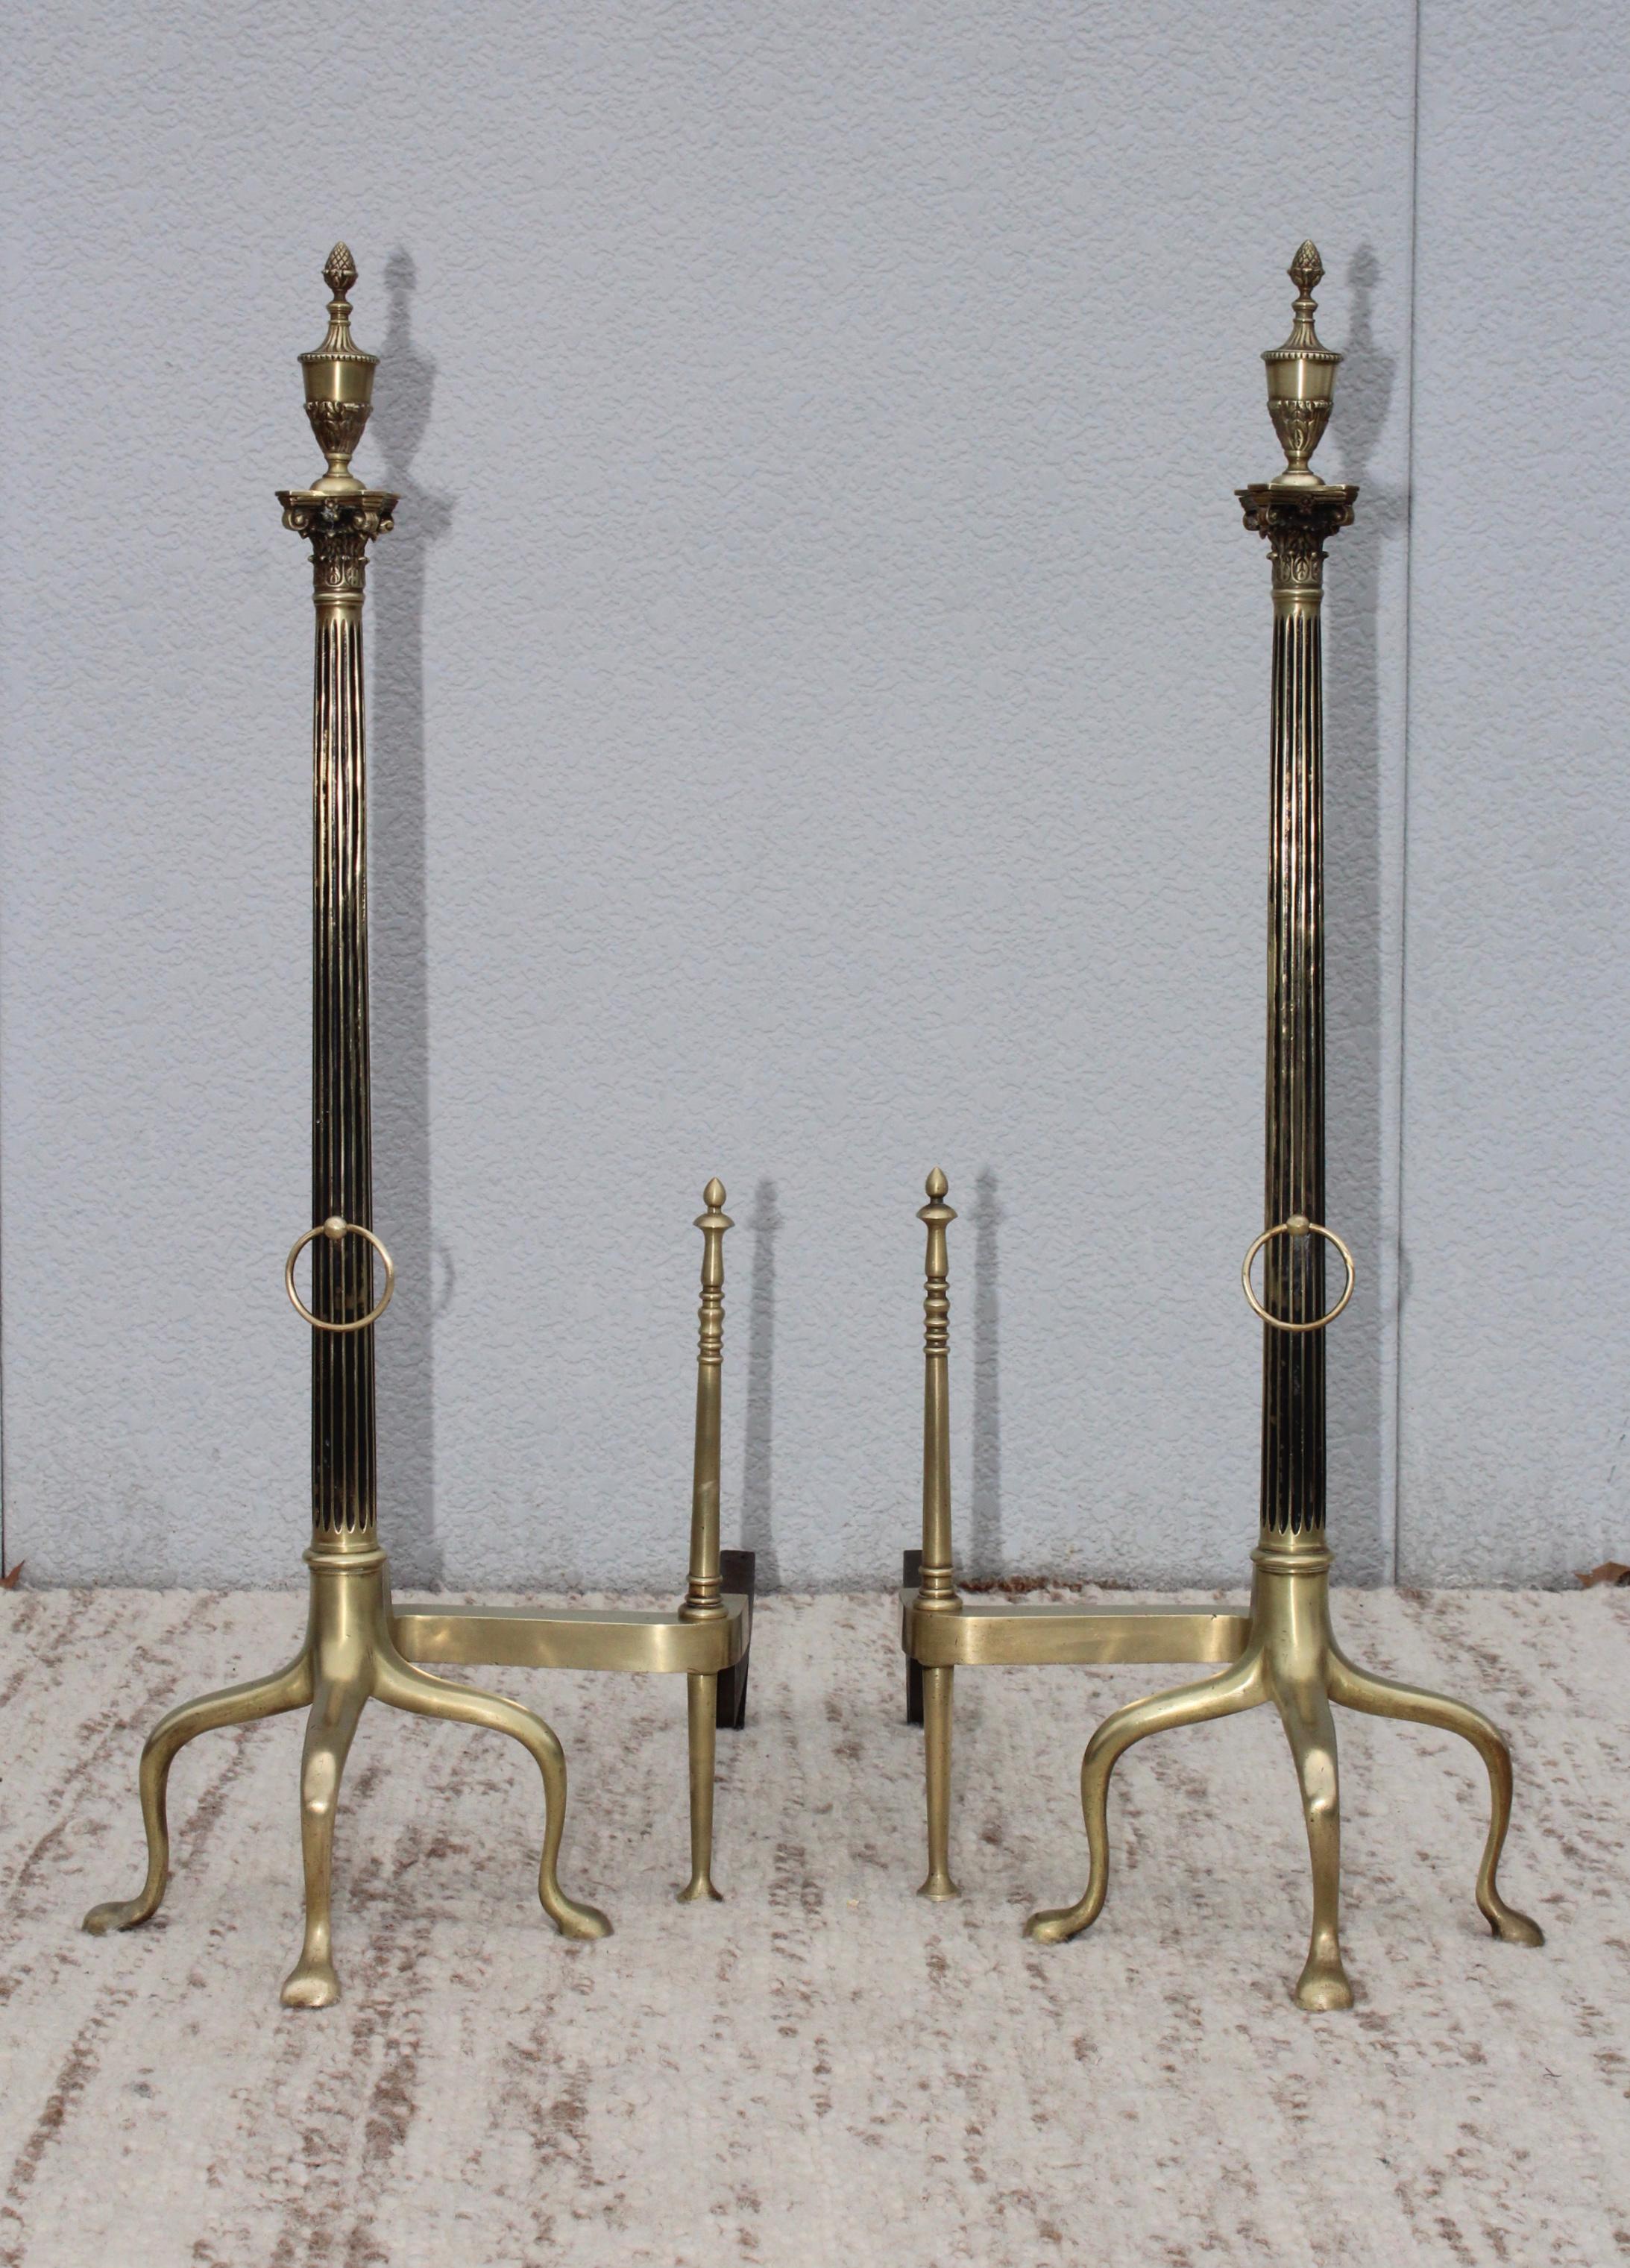 Stunning set of large 1960s mid-century modern French brass andirons, in vintage condition with minor wear and patina due to age and use, lightly hand polished.